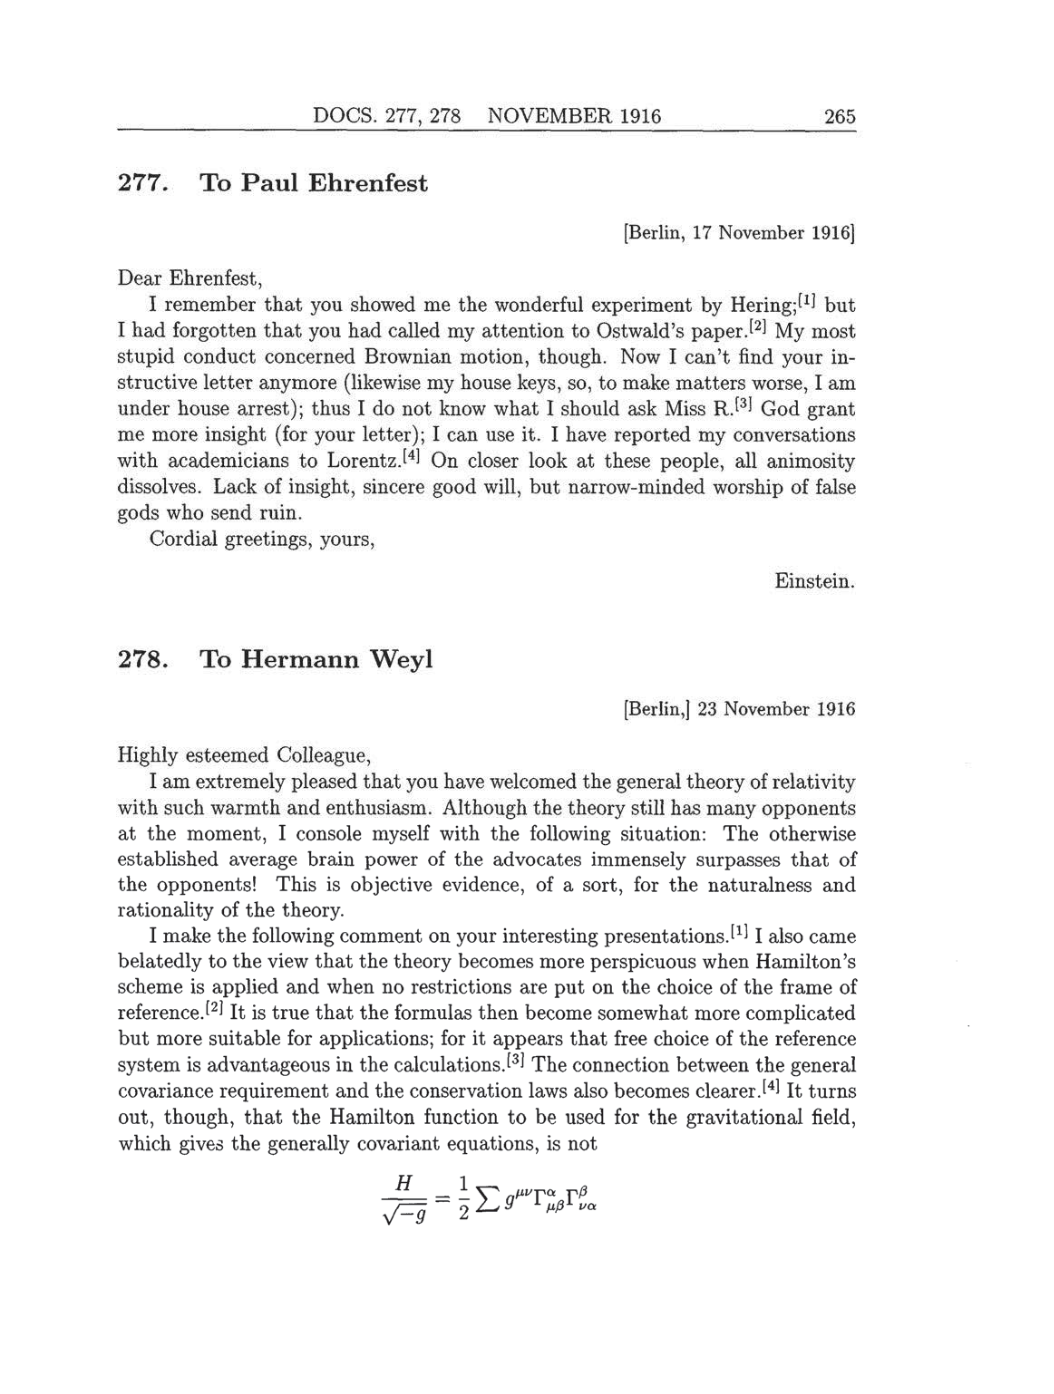 Volume 8: The Berlin Years: Correspondence, 1914-1918 (English translation supplement) page 265